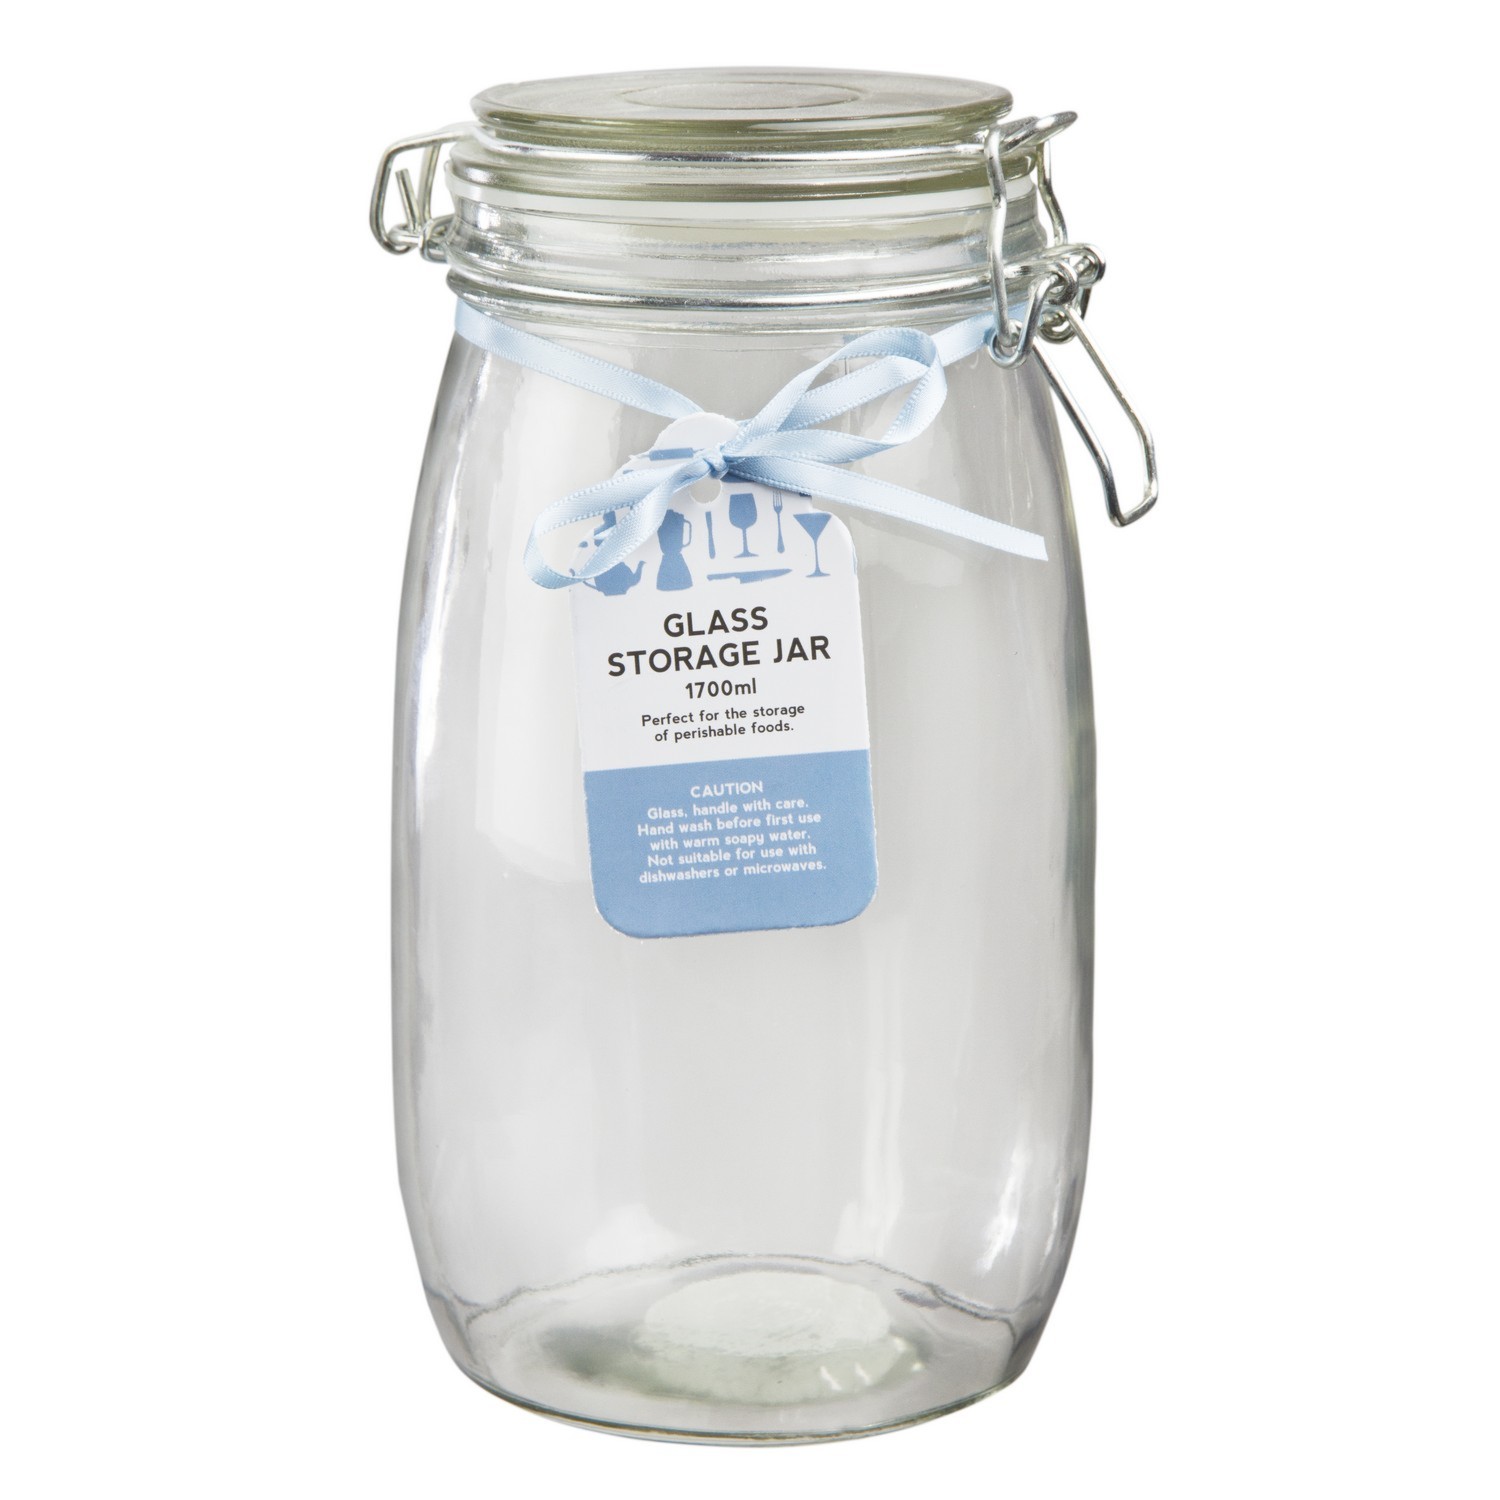 My Home 1.5L Clear Glass Storage Jar with Clip Top Lid Image 1